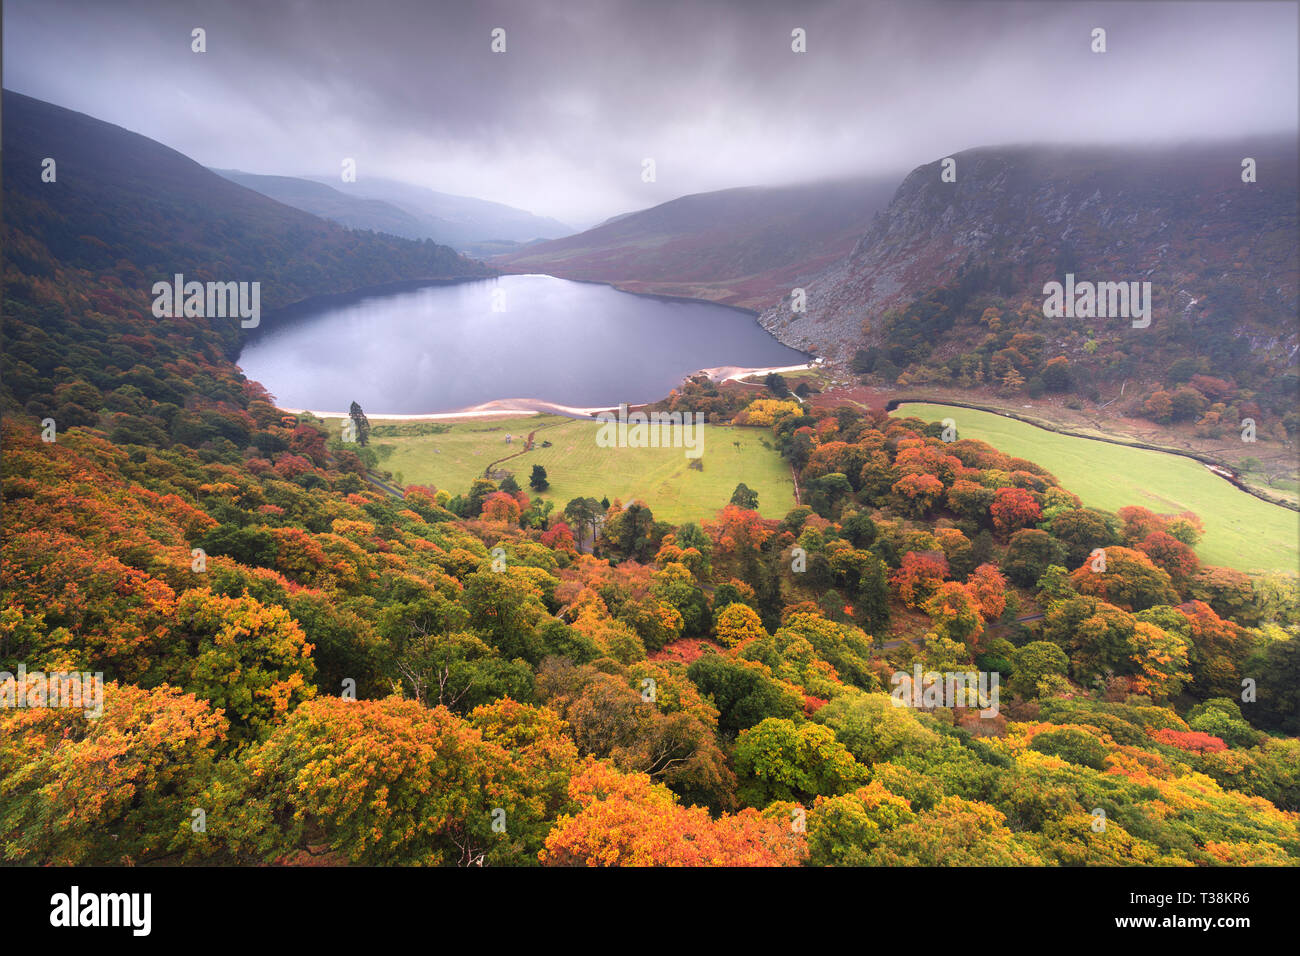 A view of Lough Tay, the so-called 'Guinness Lake', in the Wicklow mountains of Ireland. It is seen here on a misty day still a blaze with Autumn. Stock Photo